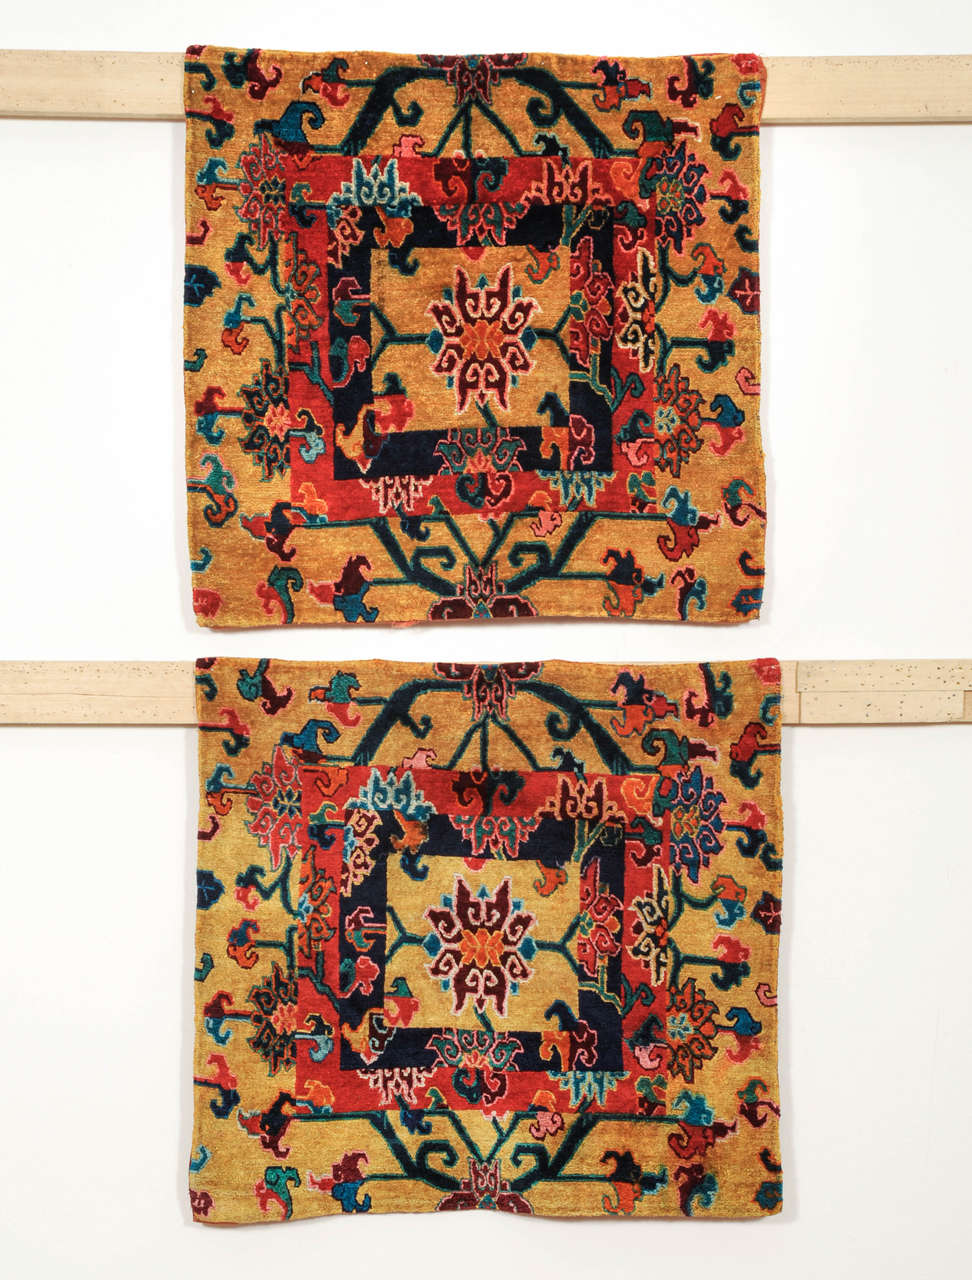 A possibly unique pair of silk meditation mats decorated by the so-called brocade square pattern, a design based on the patchwork of silk brocaded textiles. Here we see a pattern composed of three different brocade designs, framed by the pattern of